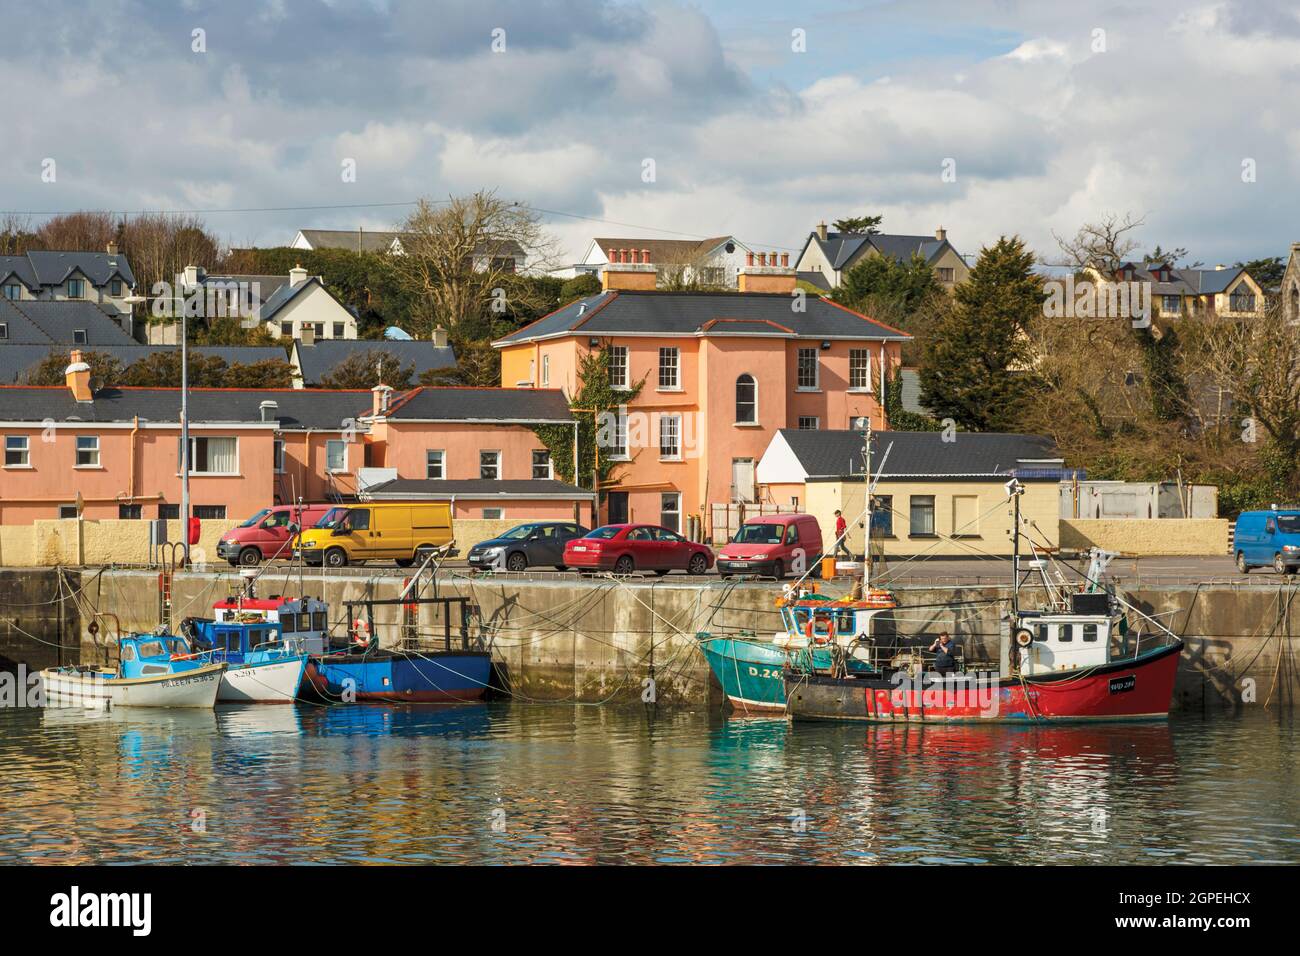 Castletownbere, County Cork, West Cork, Beara Peninsula,  Republic of Ireland. The town, which is on the Wild Atlantic Way, is also known as Castletow Stock Photo